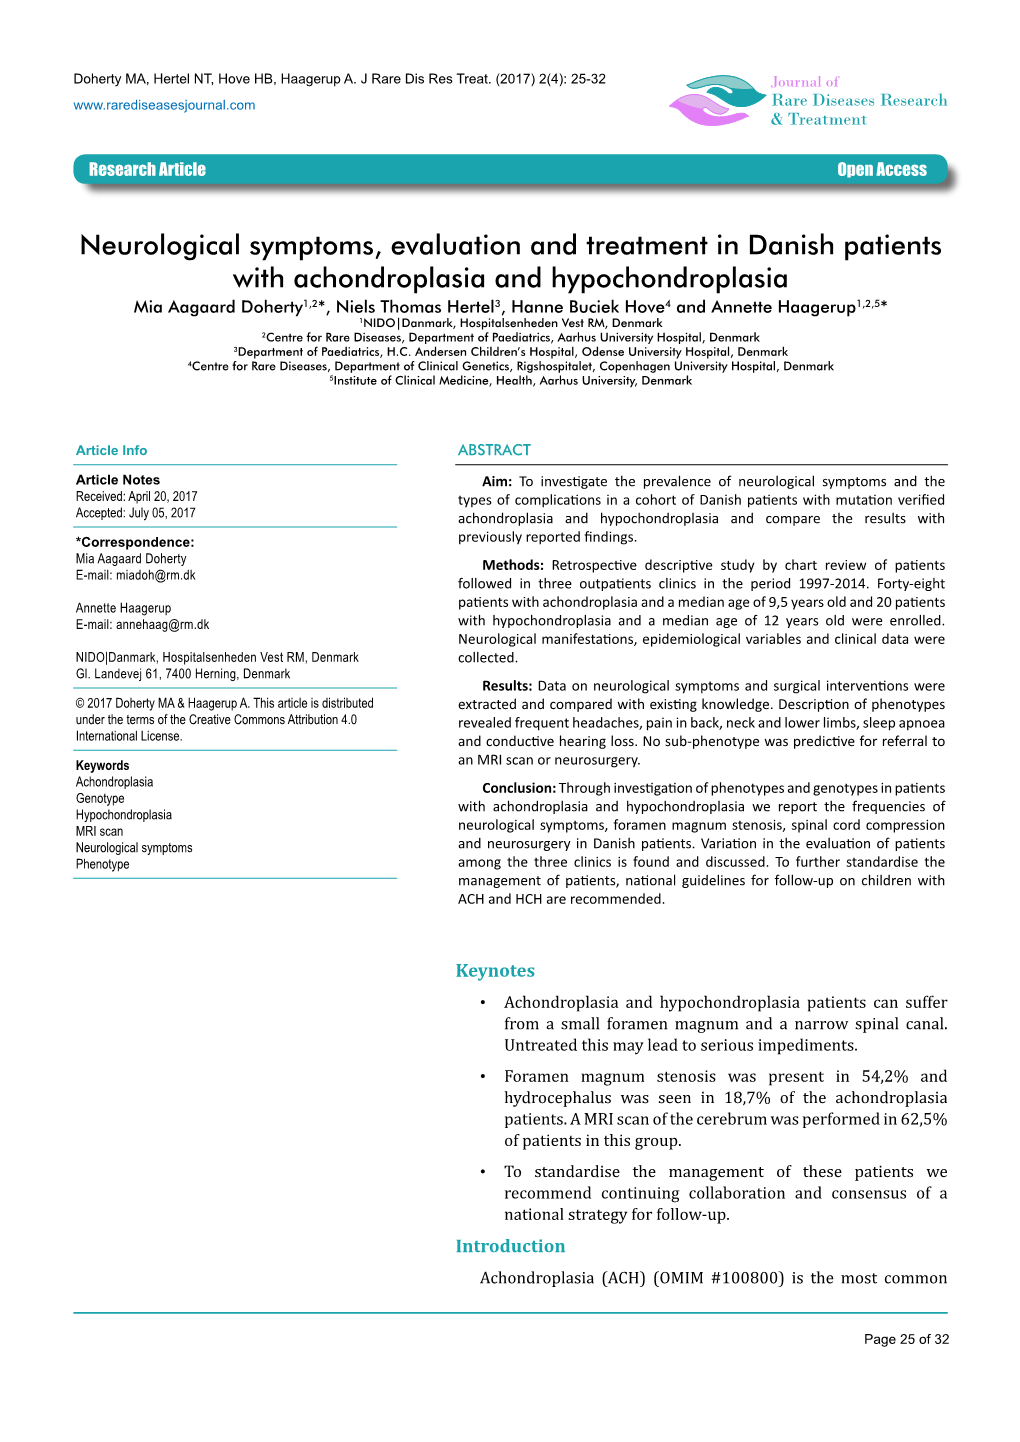 Neurological Symptoms, Evaluation and Treatment in Danish Patients